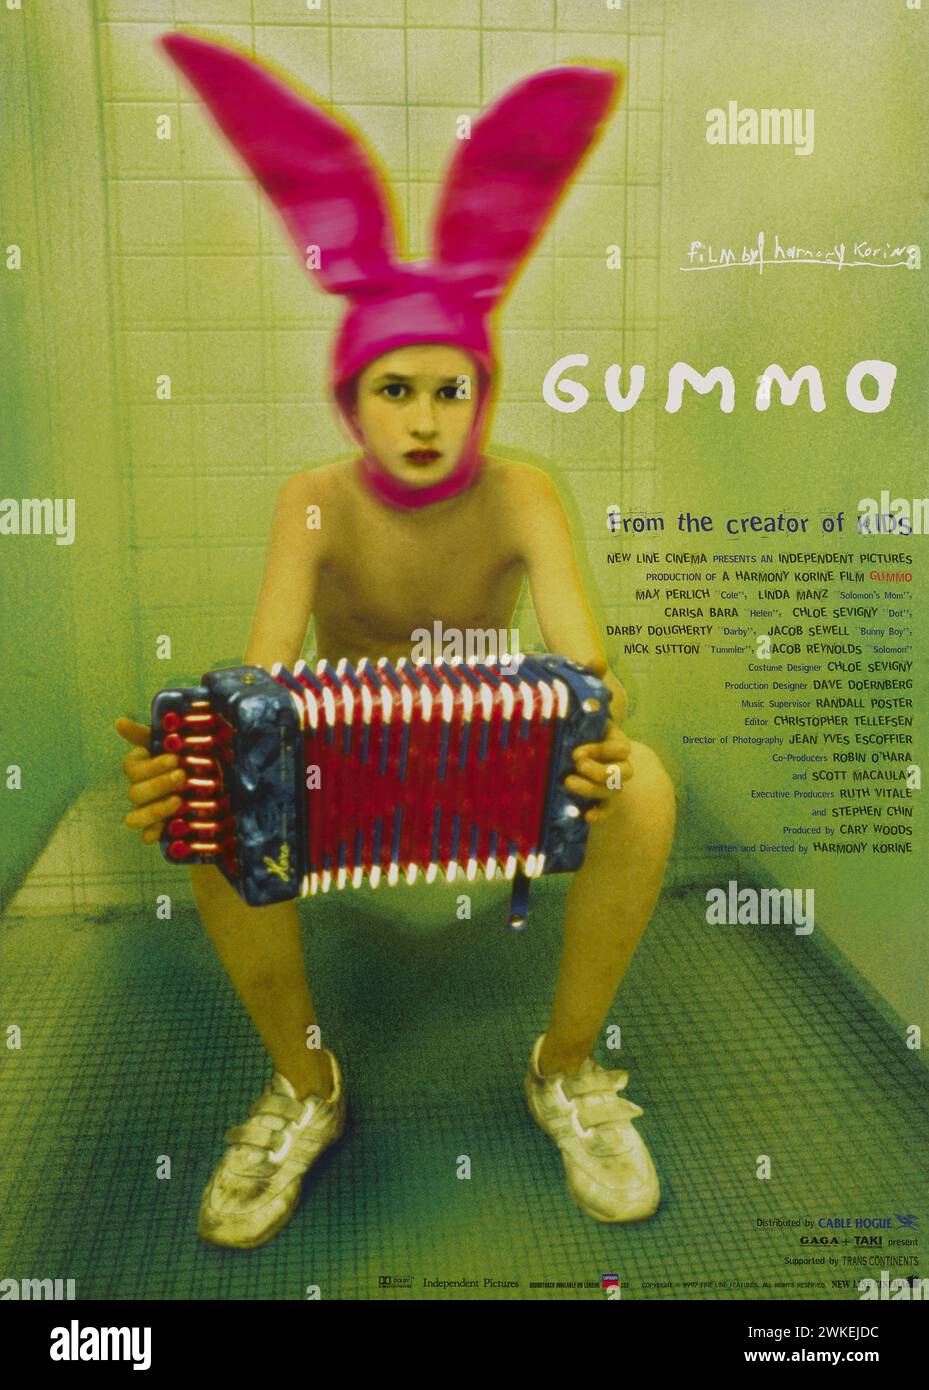 Movie poster 'Gummo' by Harmony Korine. Museum: PRIVATE COLLECTION. Author: JEAN-YVES ESCOFFIER. Stock Photo